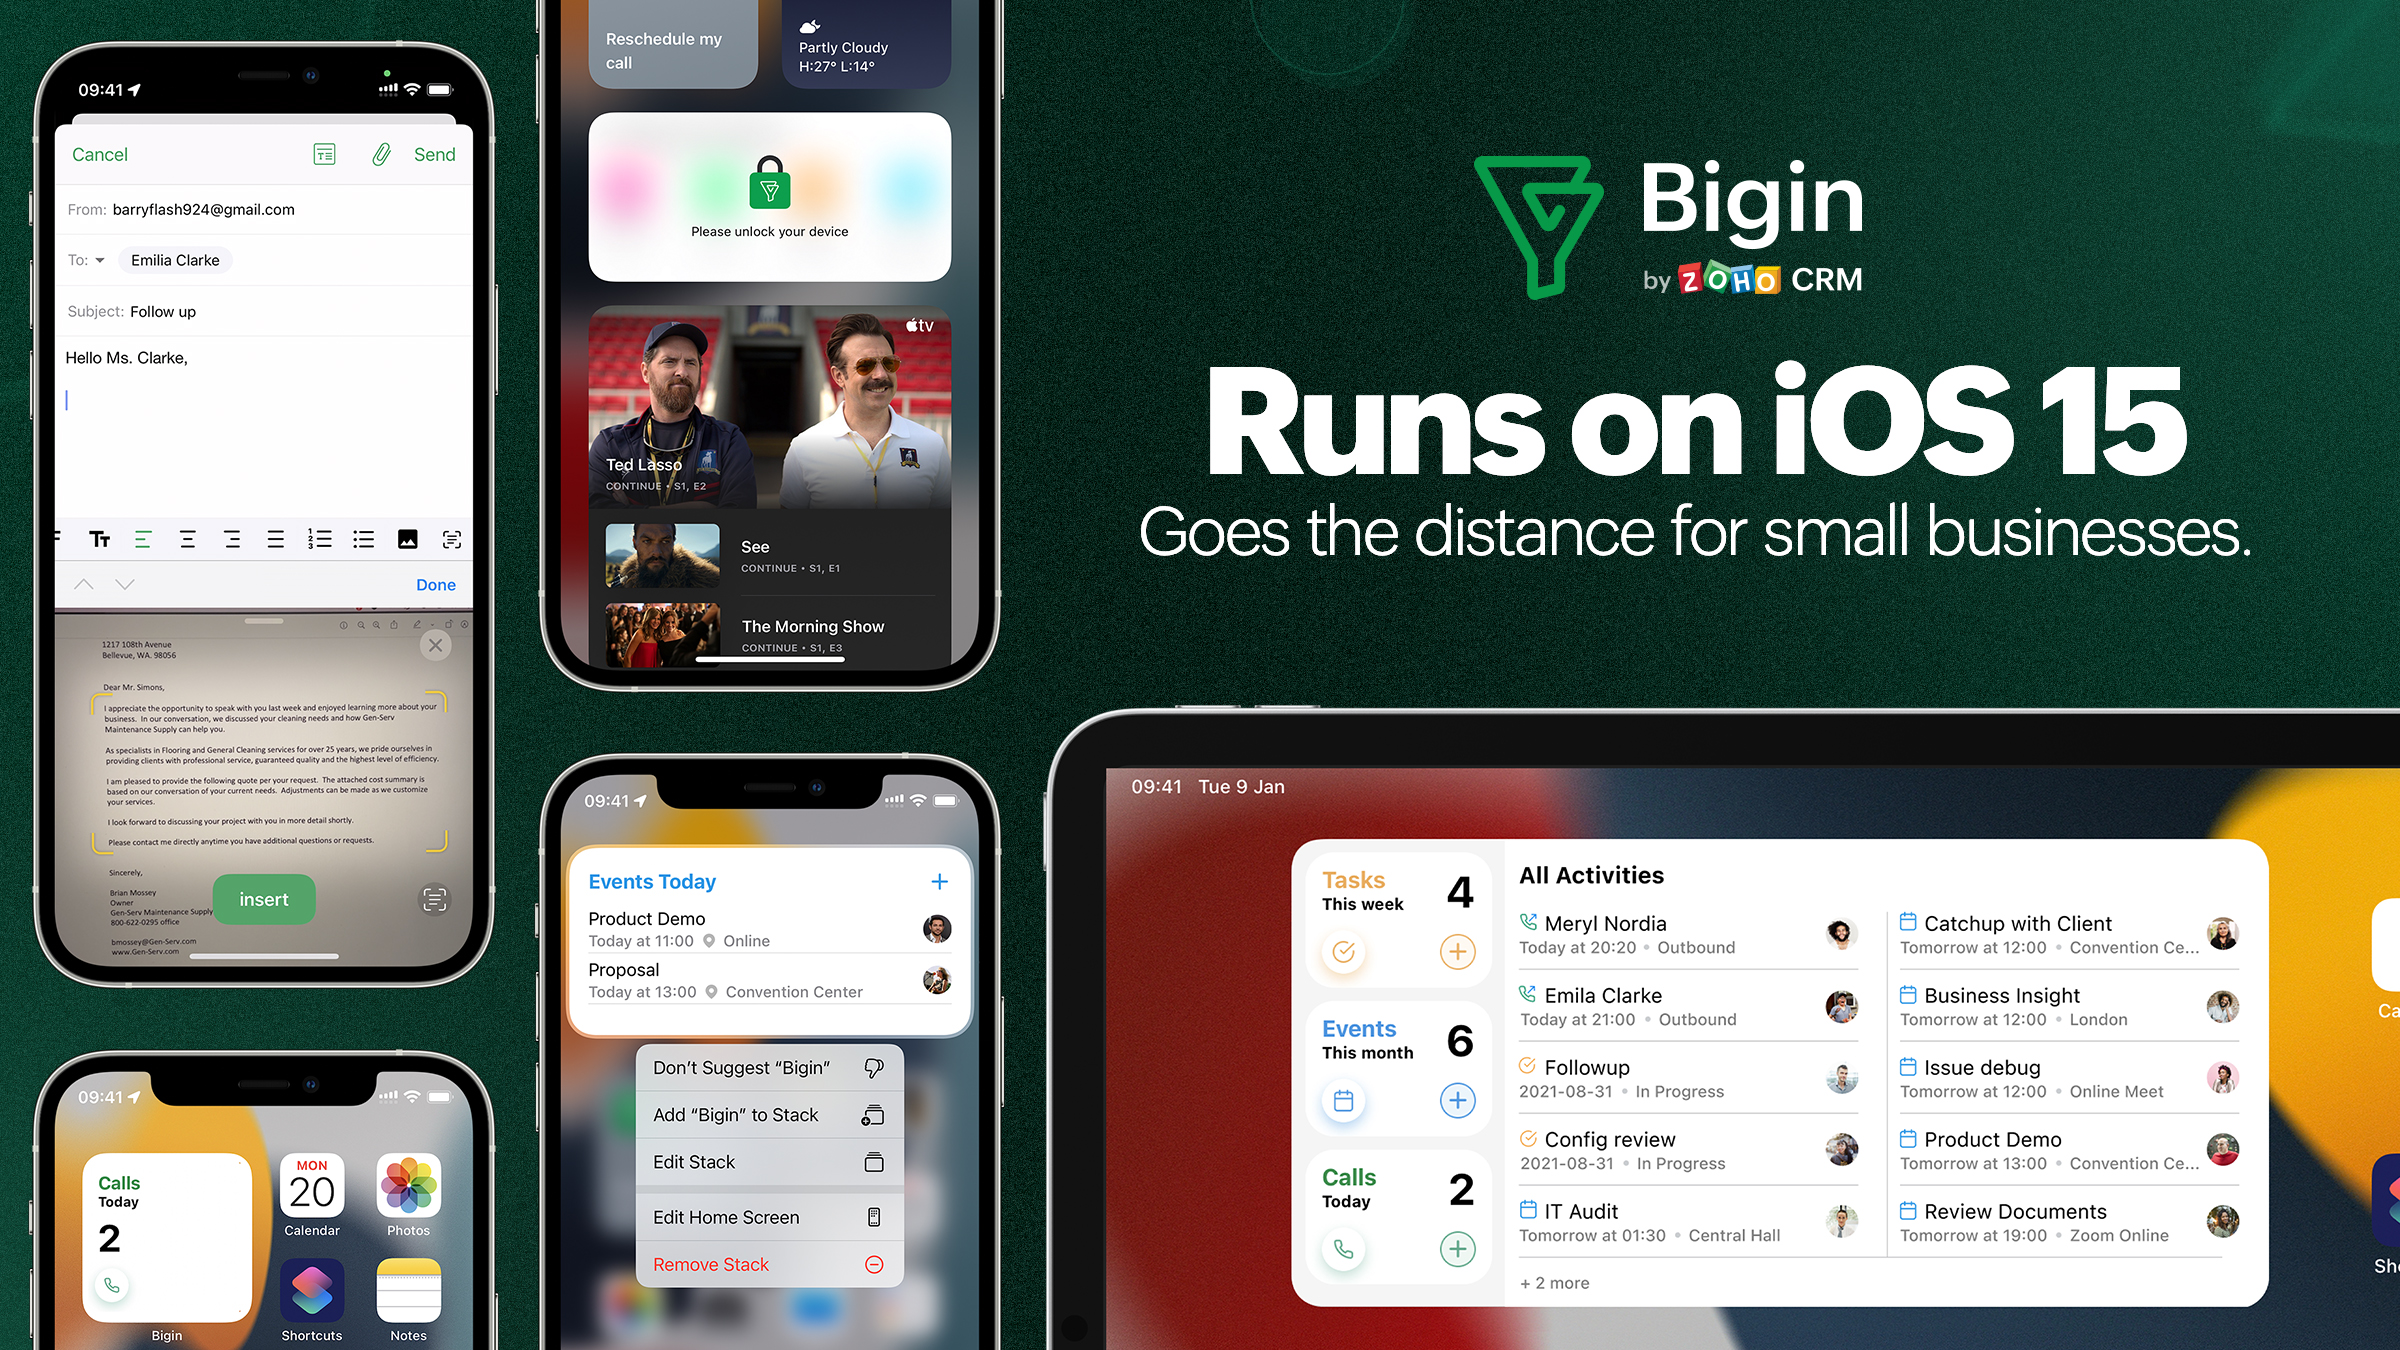 iOS 15 and iPadOS 15: Bigin is better, and more essential than ever to small businesses.